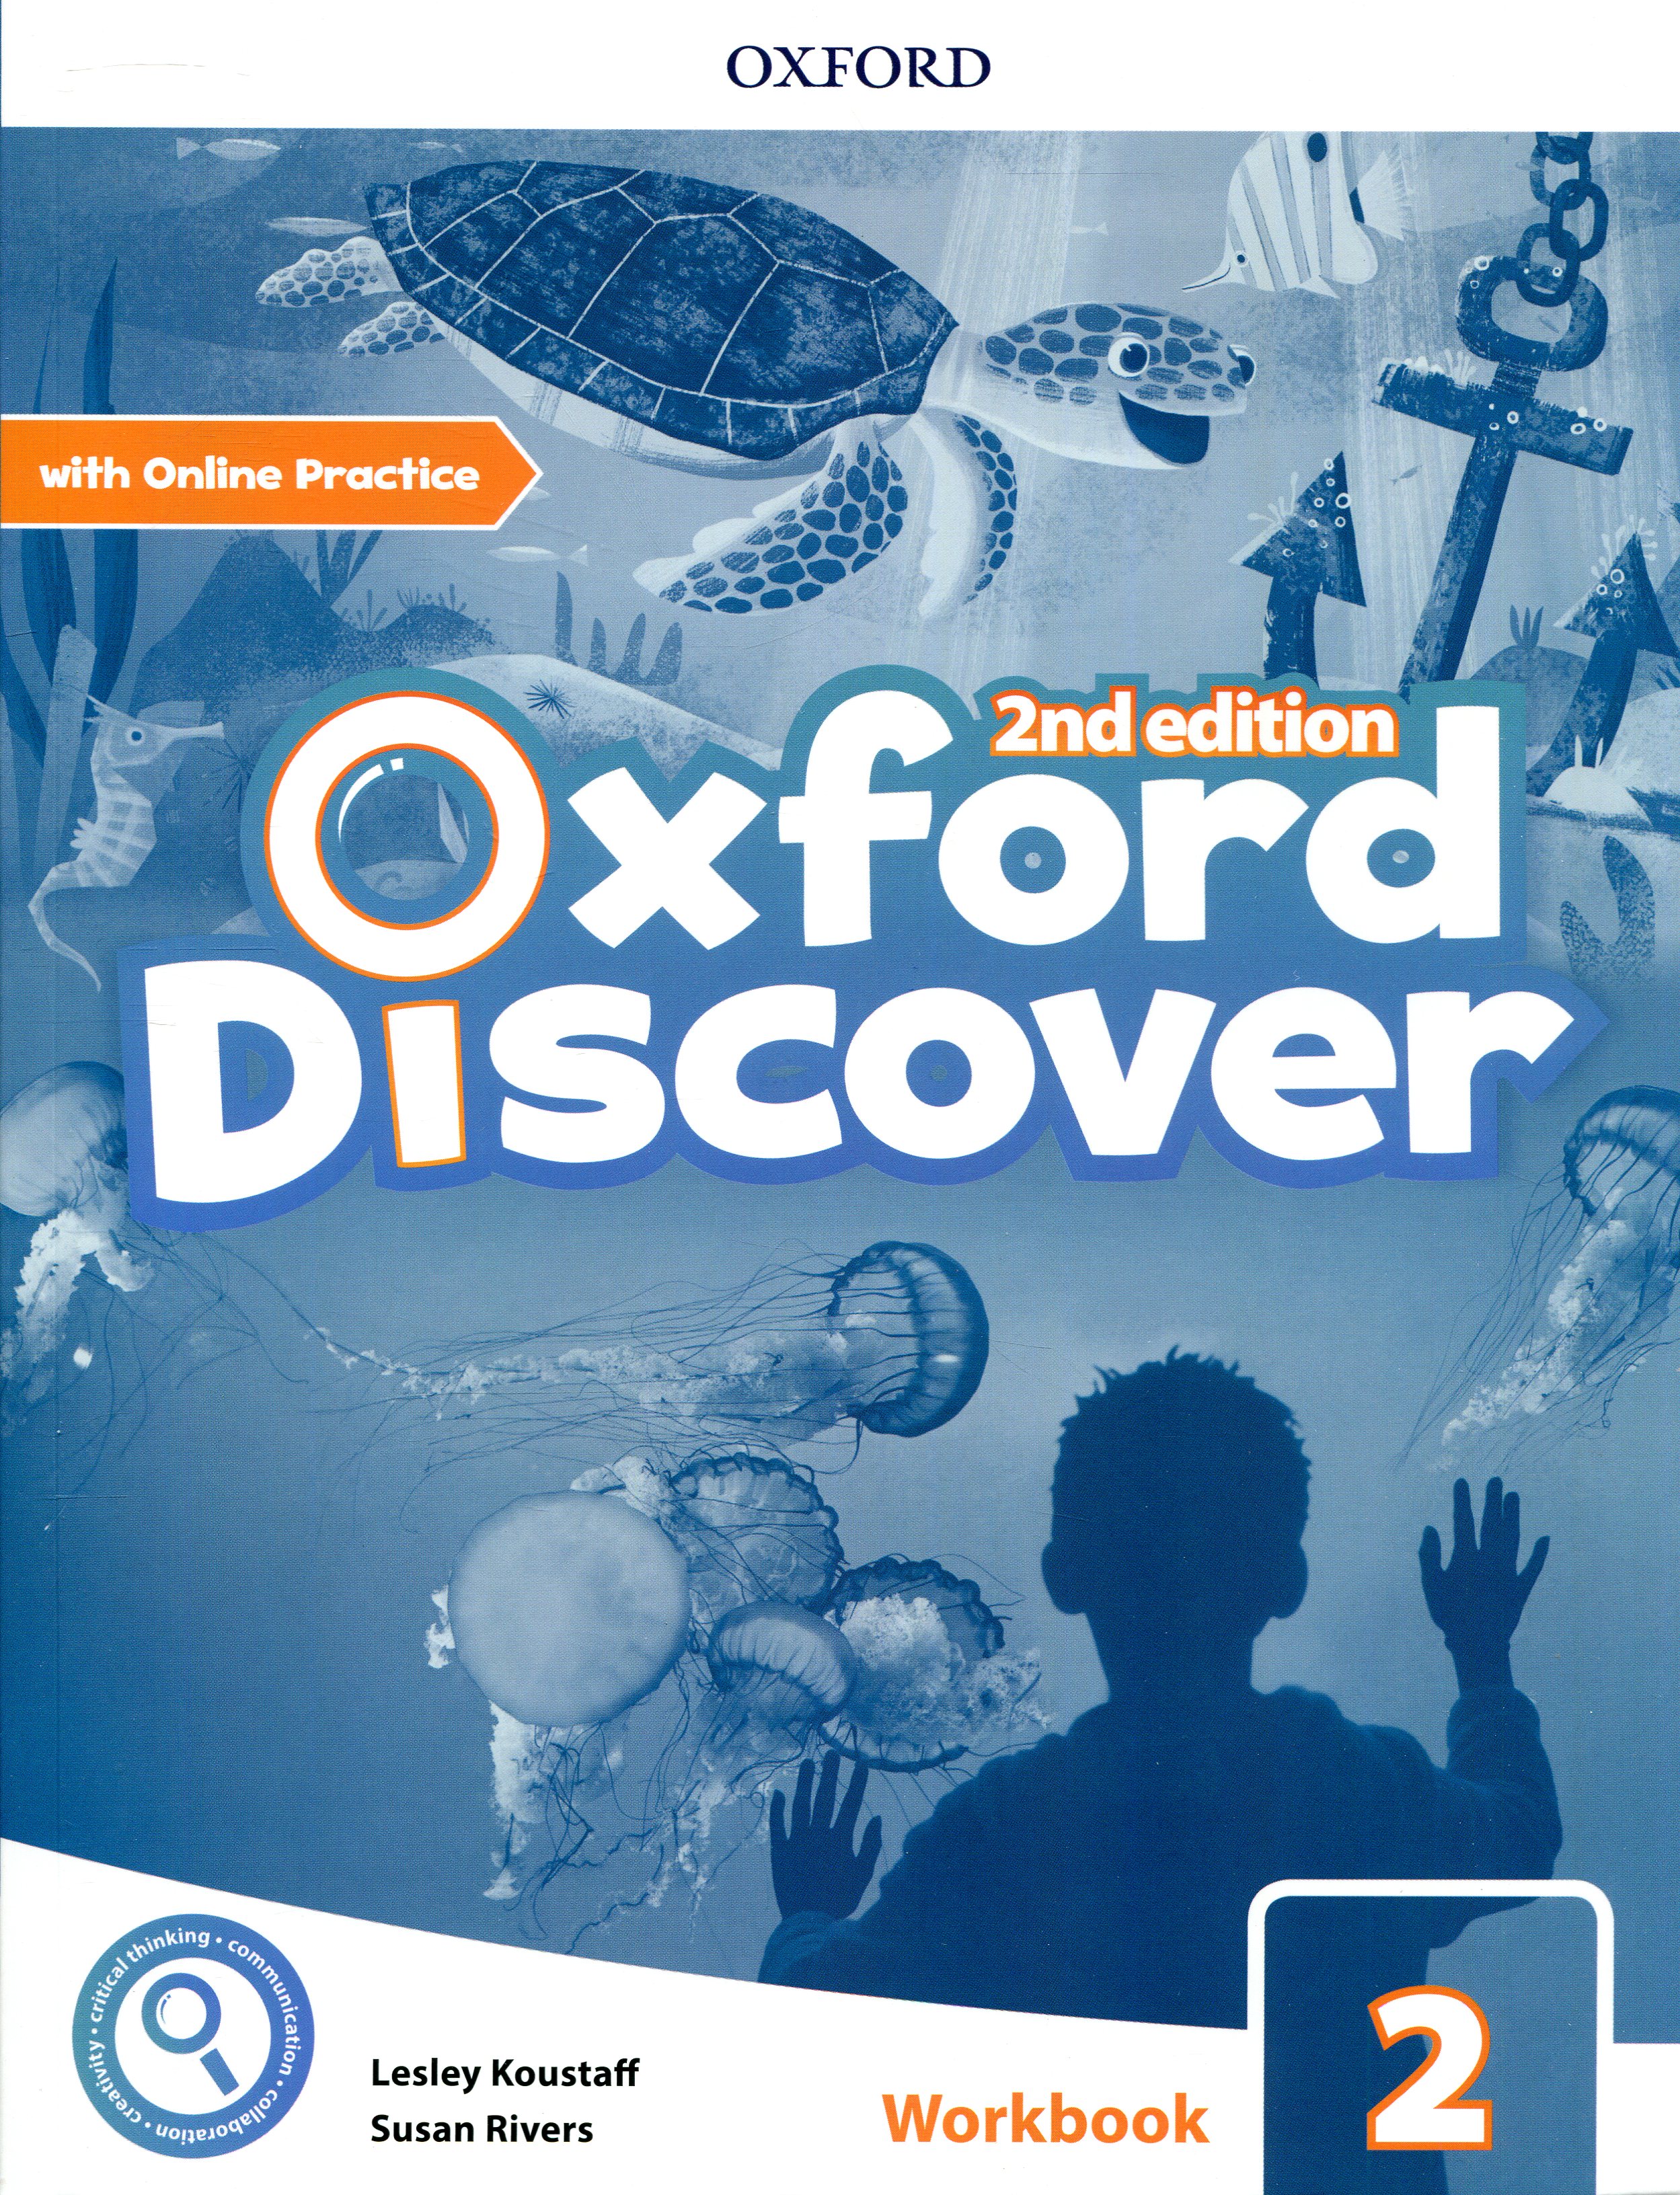 Oxford discover audio. Oxford discover 2 Edition 2. Oxford discover 1 student's book 2nd Edition. Oxford discover 1 student book 2nd Edition Audio. Oxford discover 3 2nd Edition.